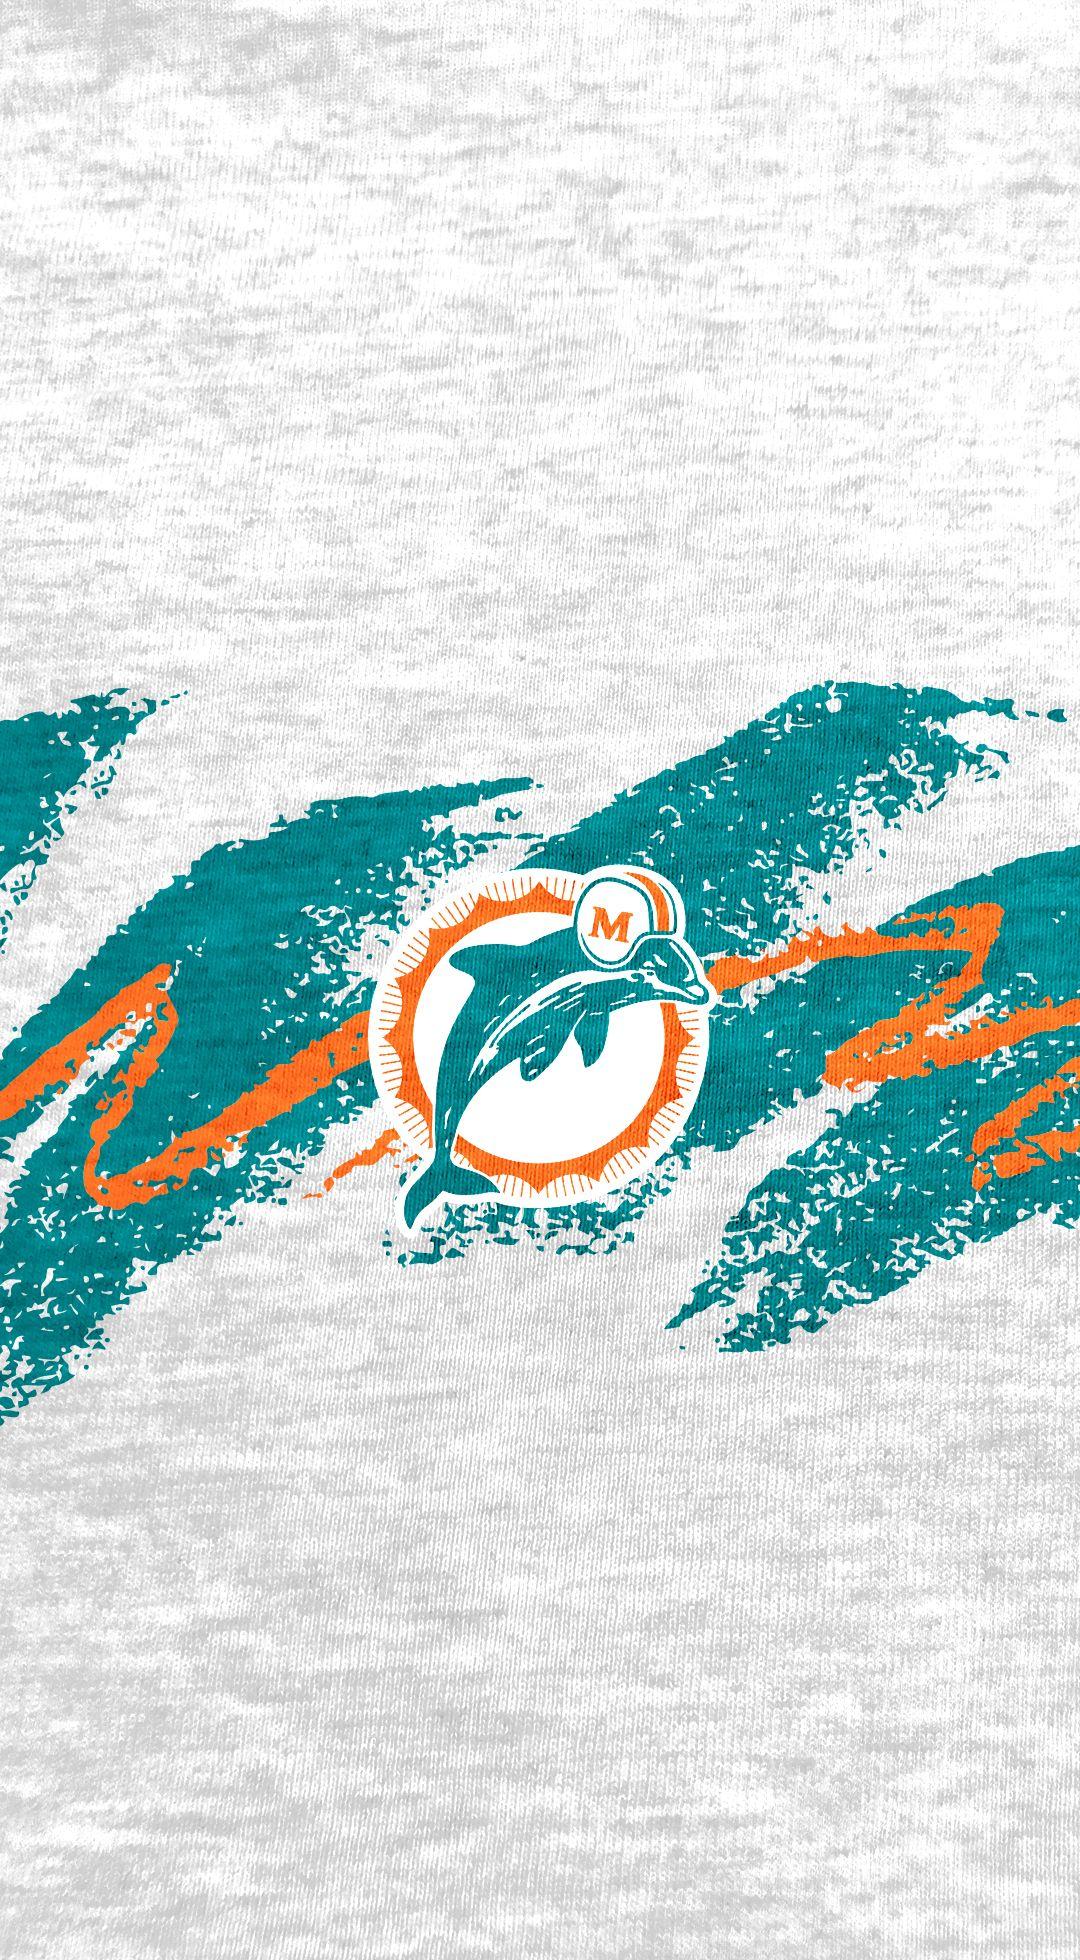 Download wallpapers Miami Dolphins 4k logo grunge art American football  team emblem blue background paint art NFL Miami Florida USA  National Football League creative art for desktop with resolution  3840x2400 High Quality